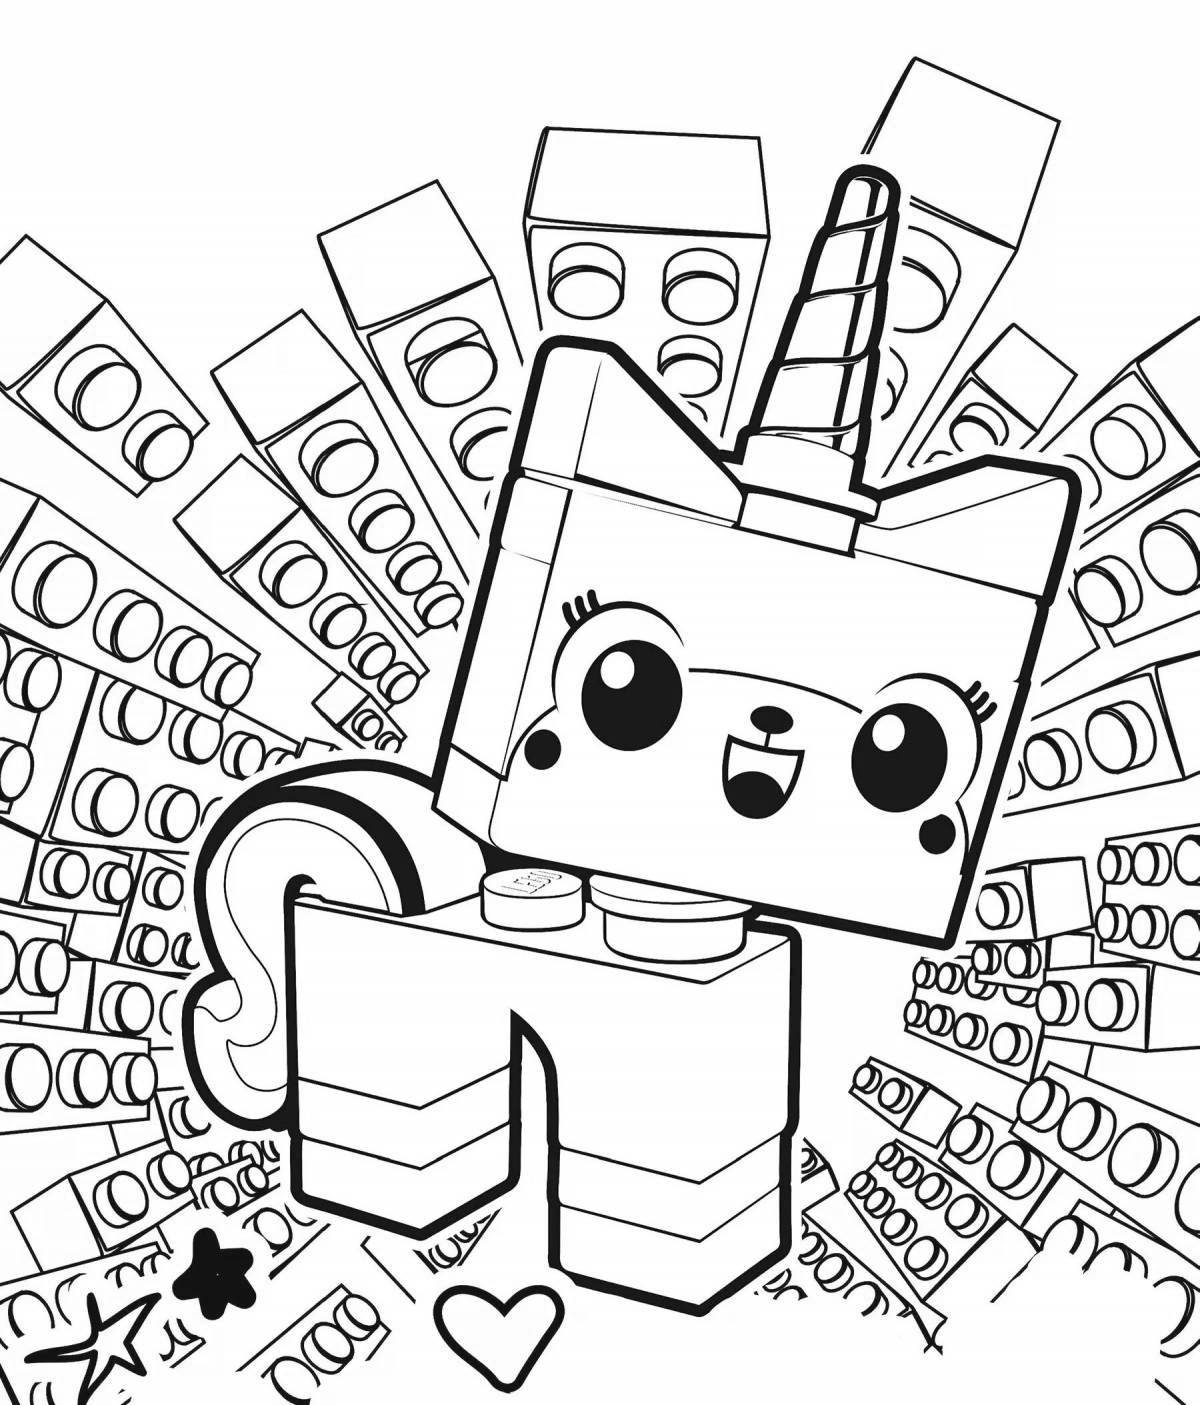 Cute unikitty lego coloring page